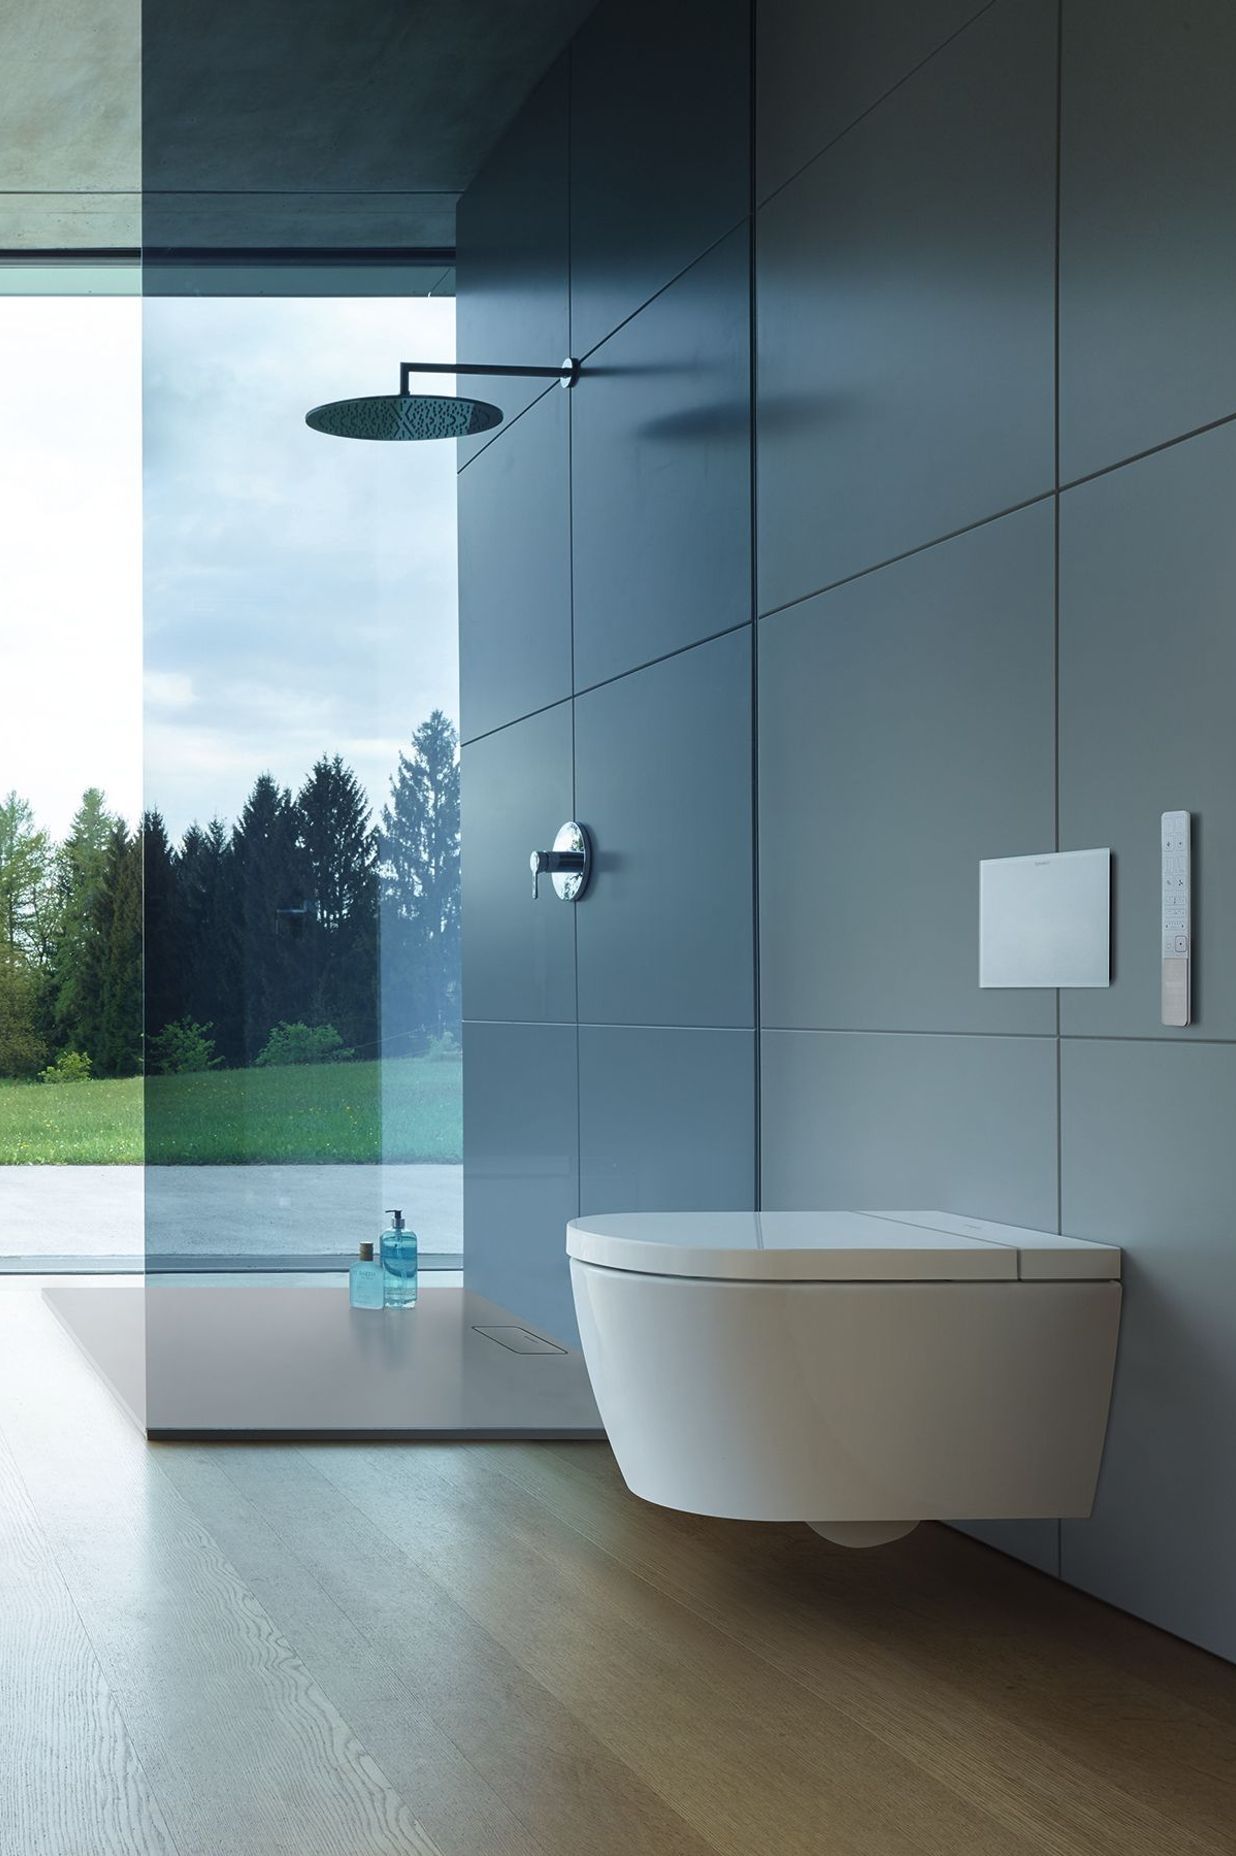 A minimalist shower and smart toilet are the perfect combo in this sleek bathroom.